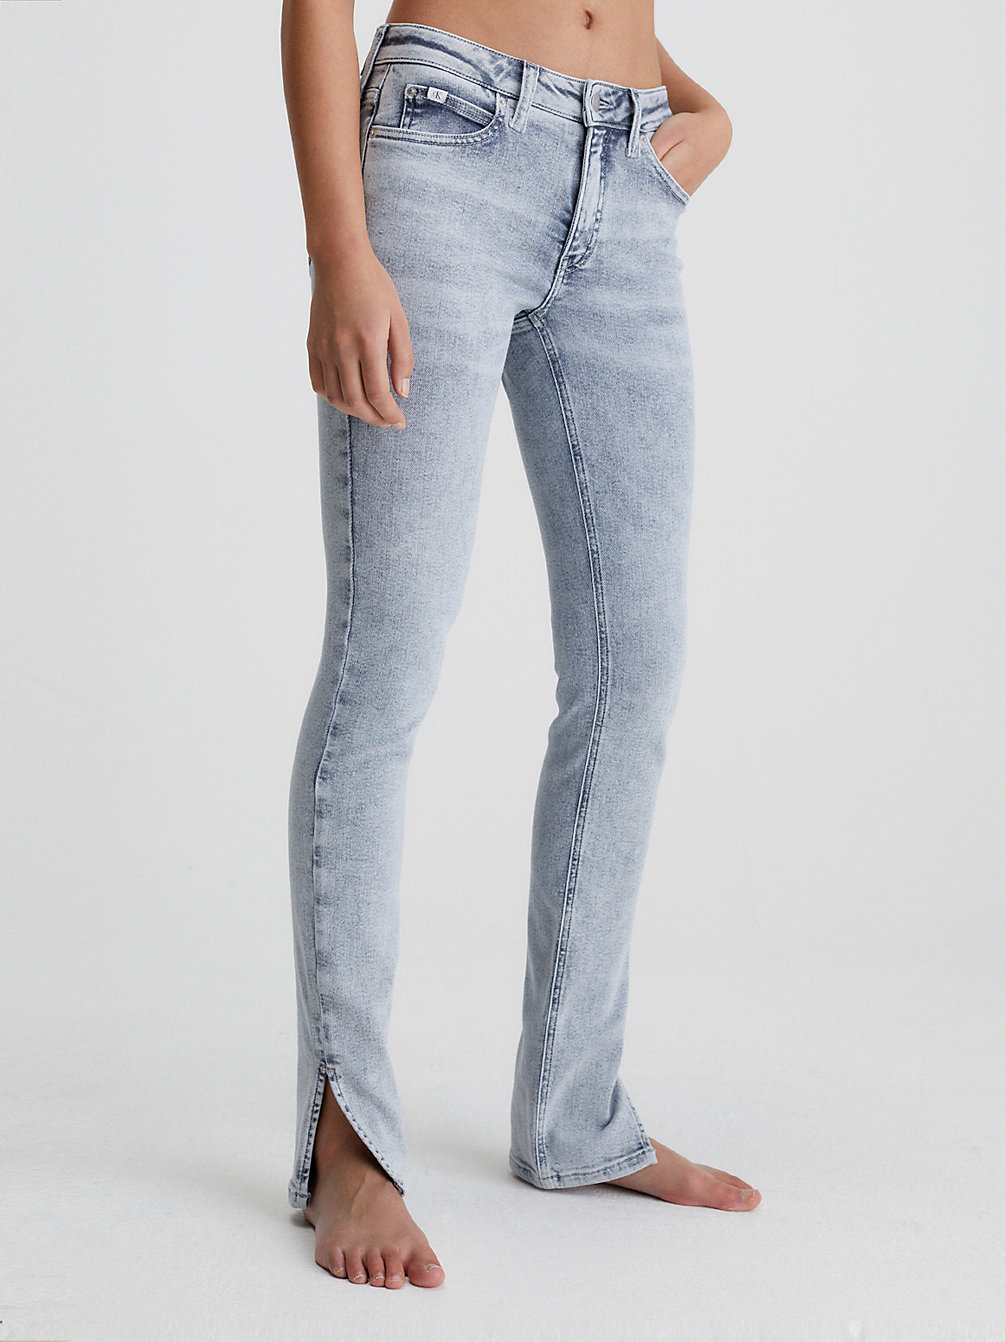 Mid Rise Skinny Jeans > DENIM GREY > undefined mujeres > Calvin Klein